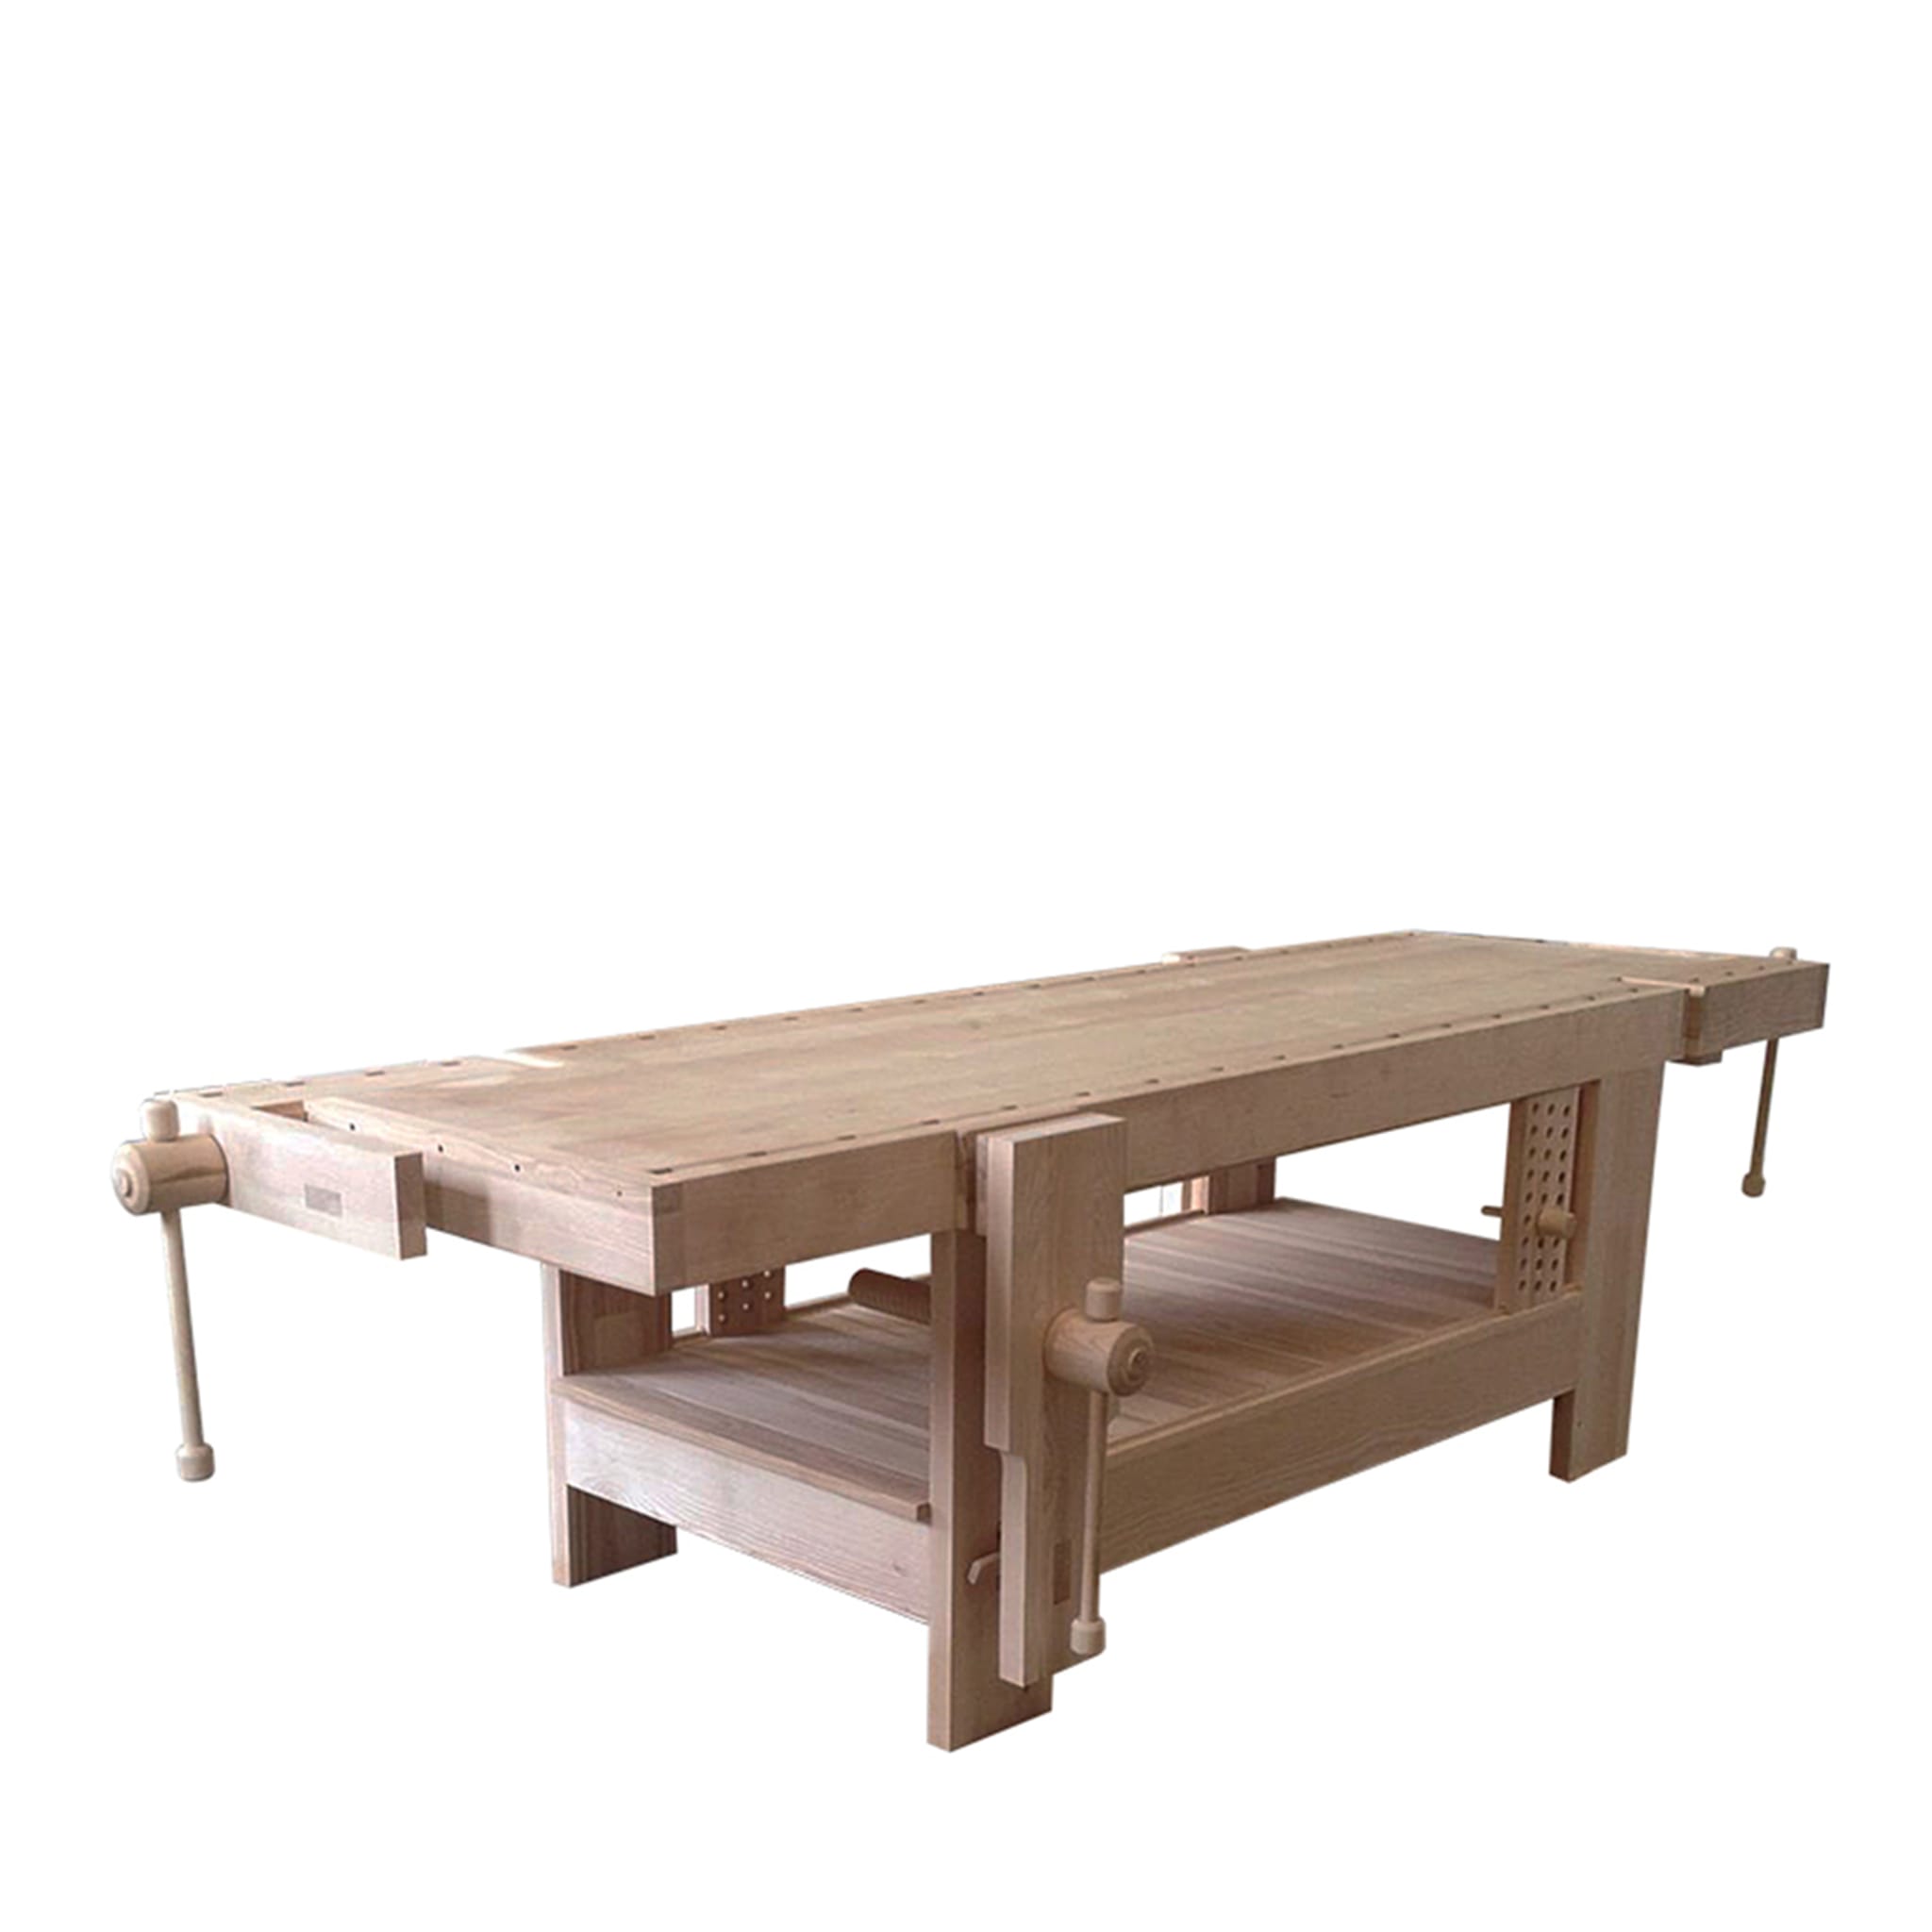 Oroval Carpenter Table - Main view